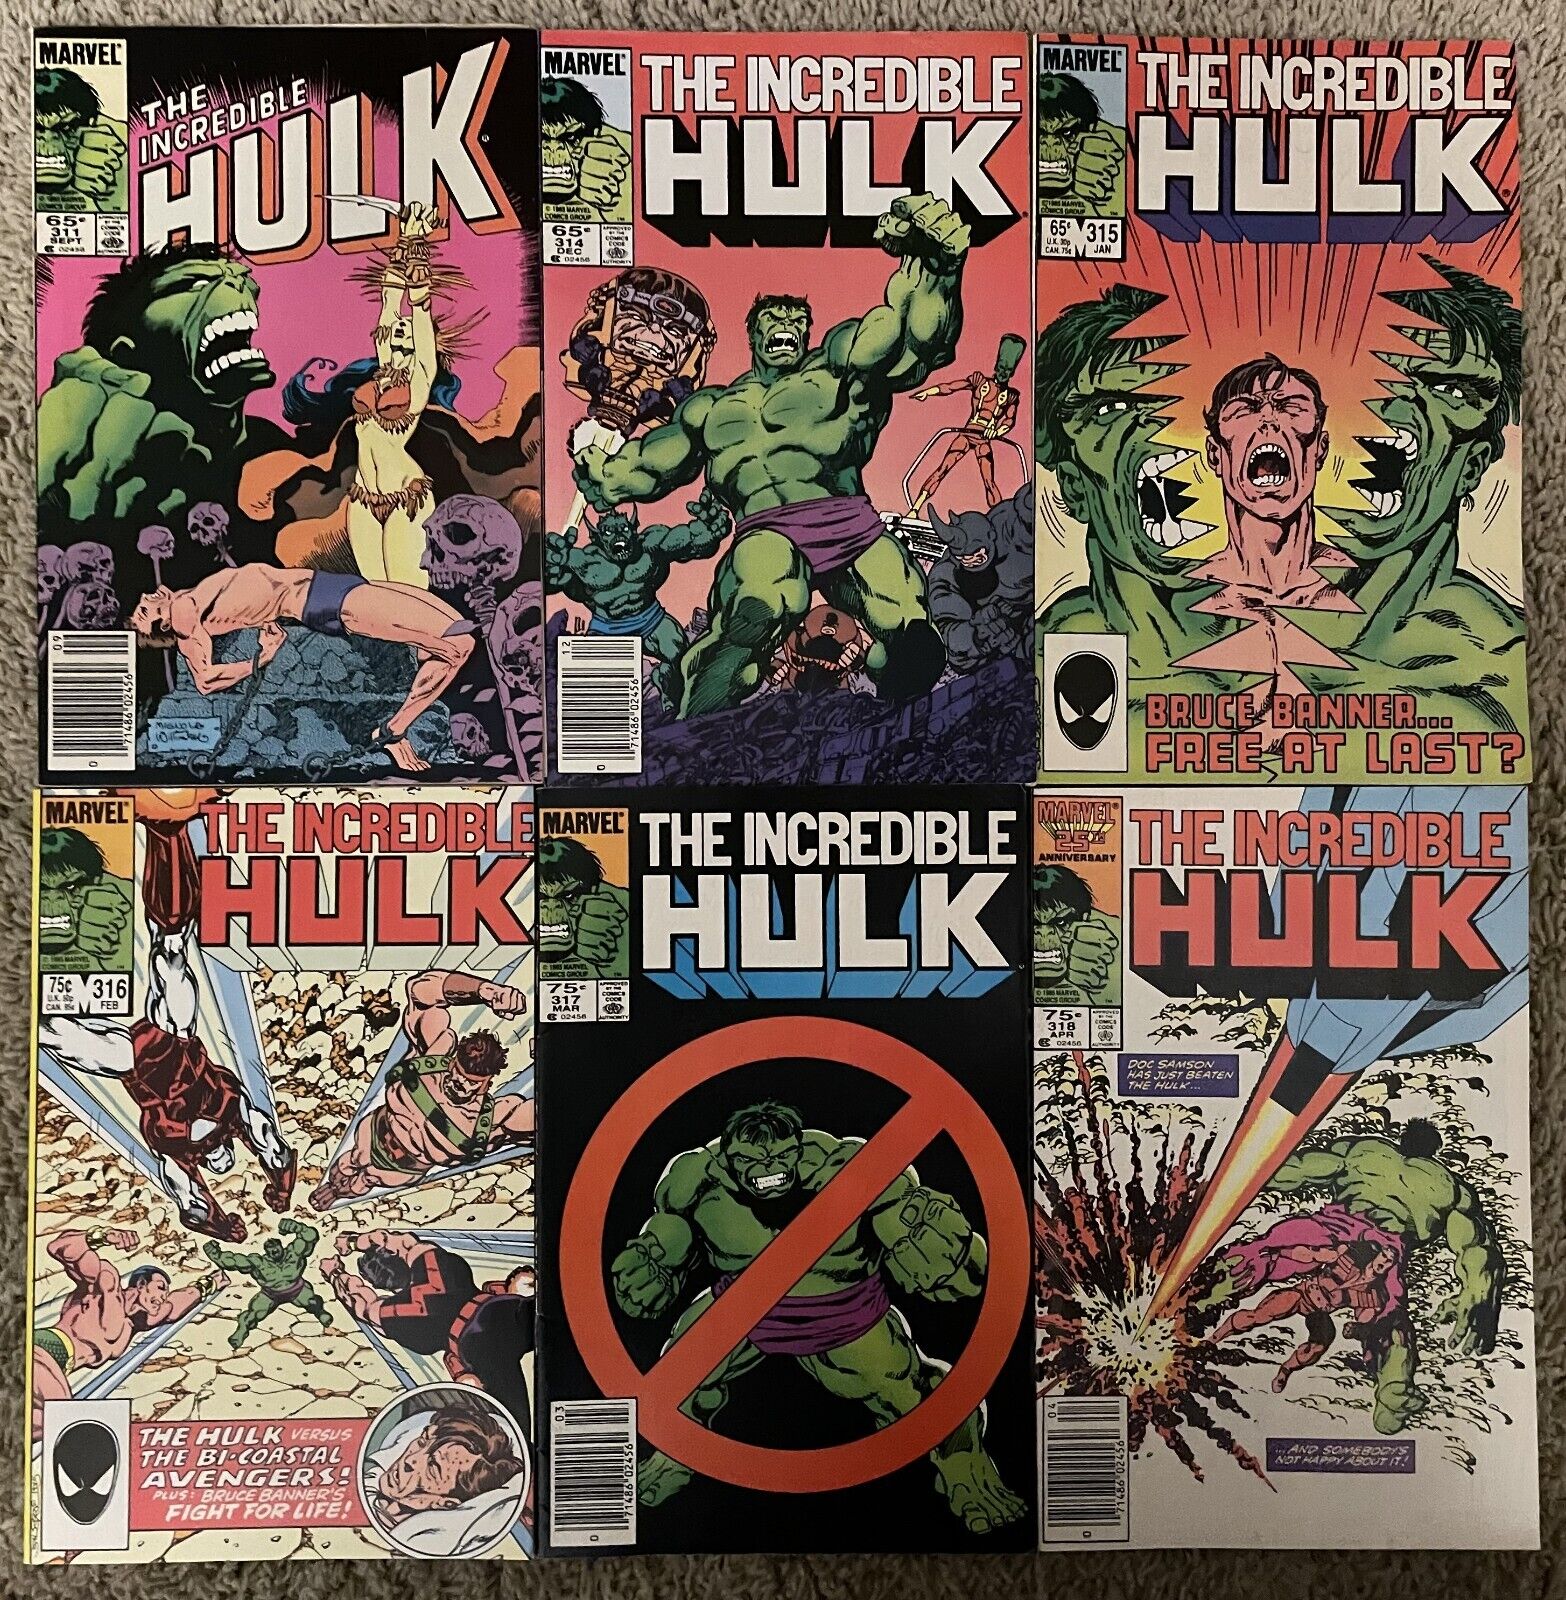 The Incredible Hulk Lot #12 Marvel comic series from the 1970s